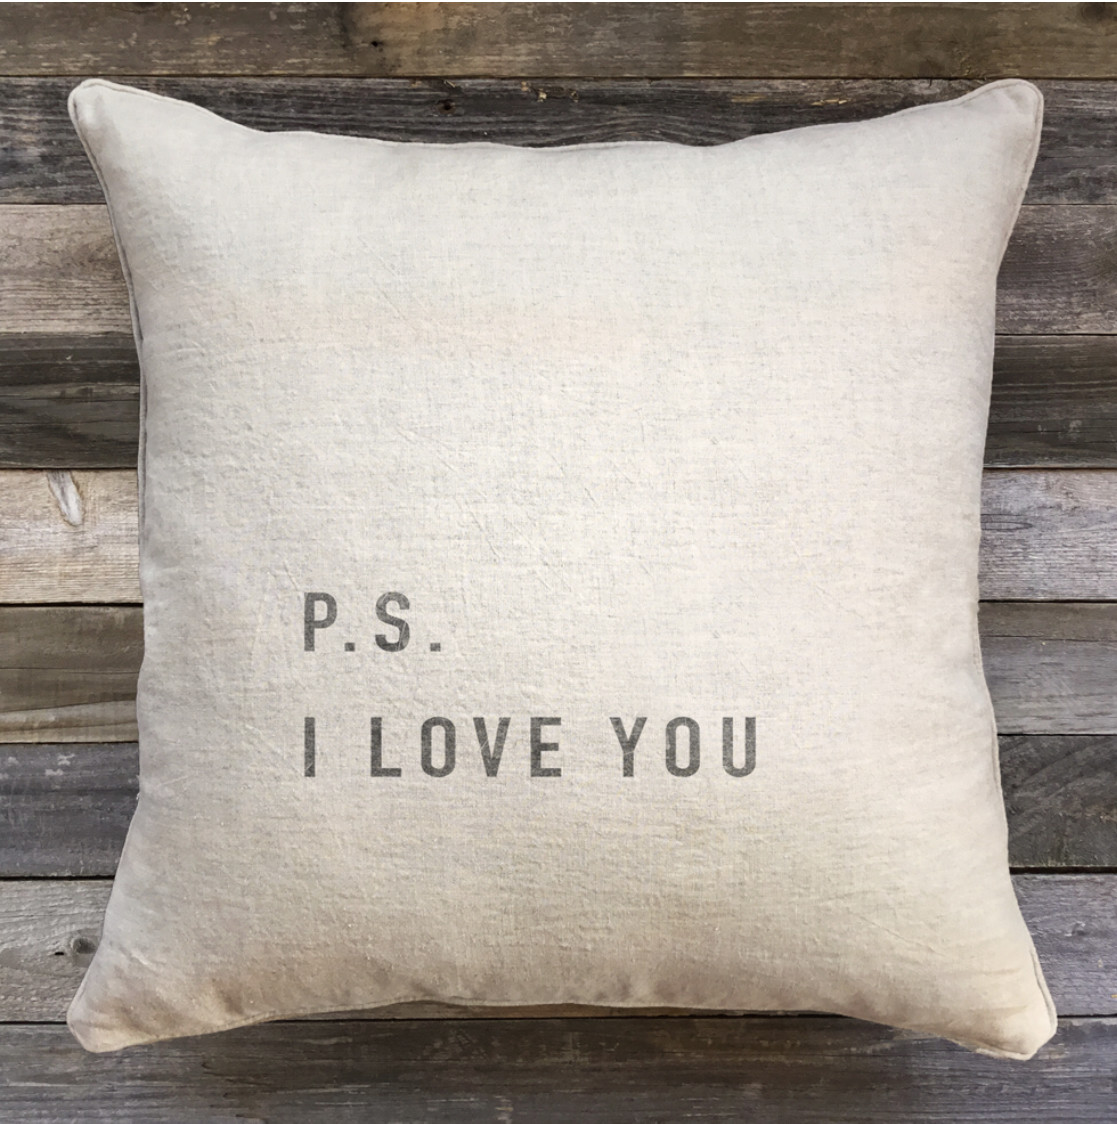 P.S. I love you pillow